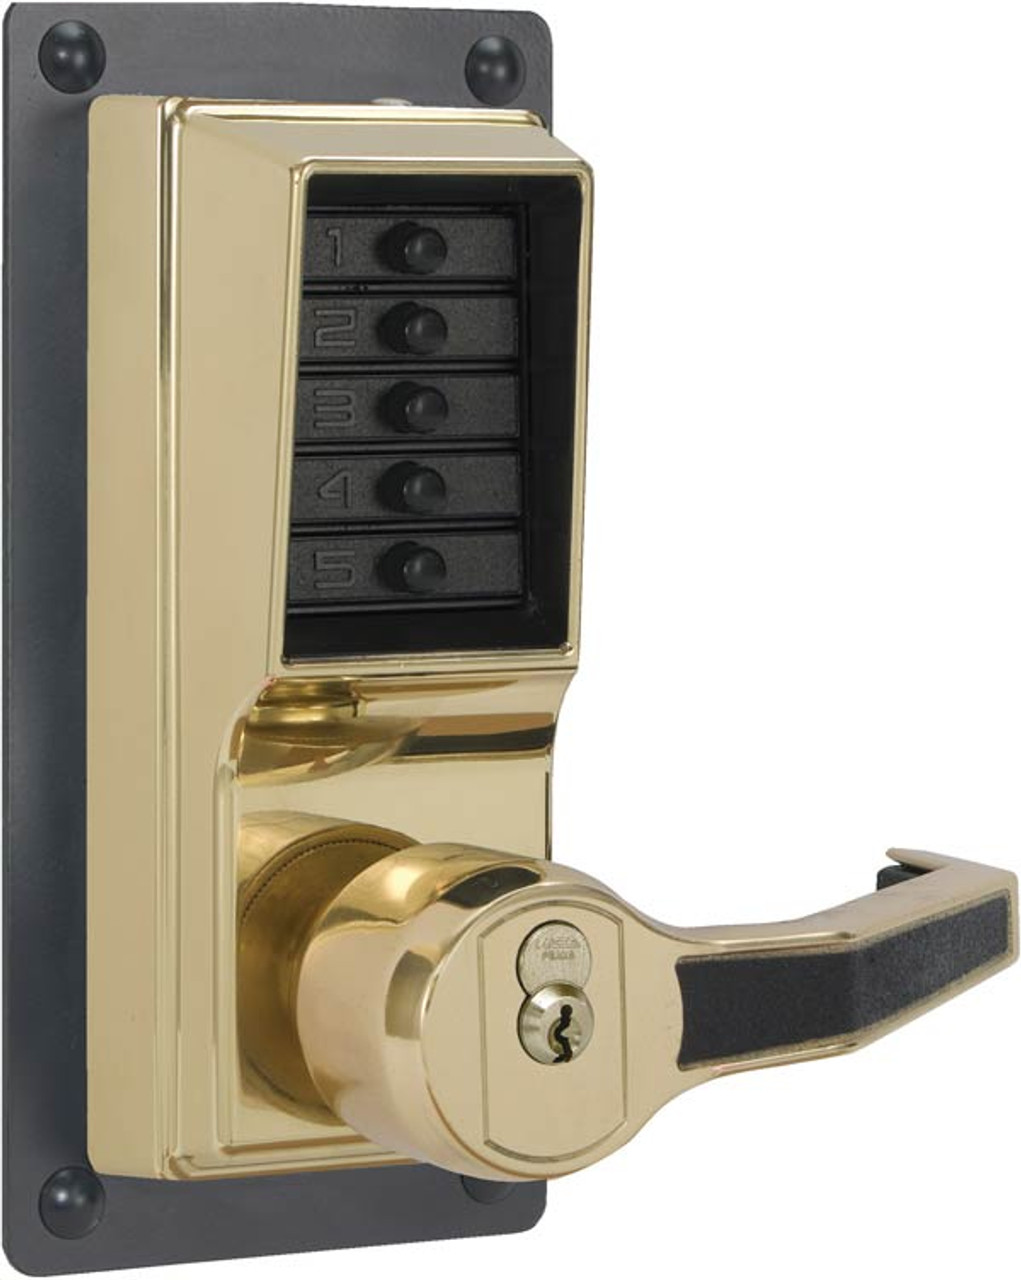 LRP1020B-03 Simplex Exit Trim Lever with Best SFIC Key Override option in Bright Brass finish